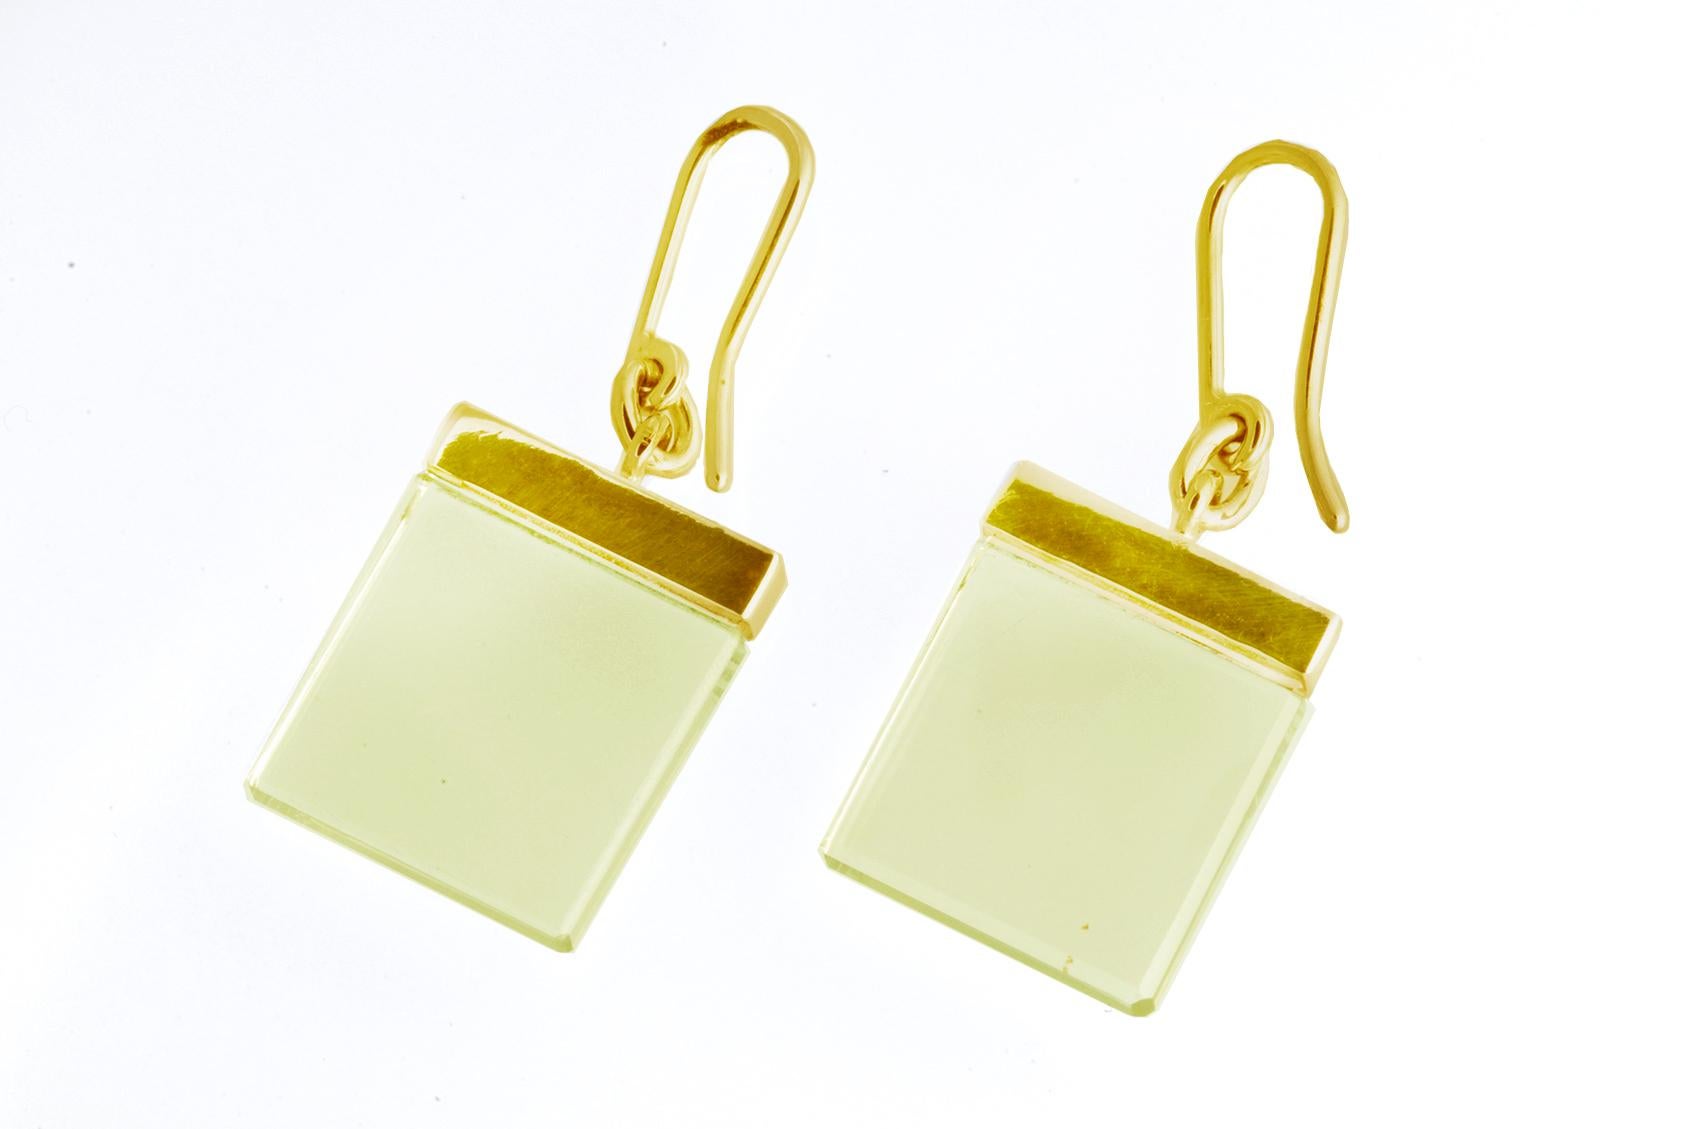 These elegant earrings are part of the Ink collection, designed by Berlin-based oil painter, Polya Medvedeva. Made of 14 karat yellow gold, the earrings feature 15x15x3 mm transparent lemon quartzes that allow light to pass through. The minimalistic